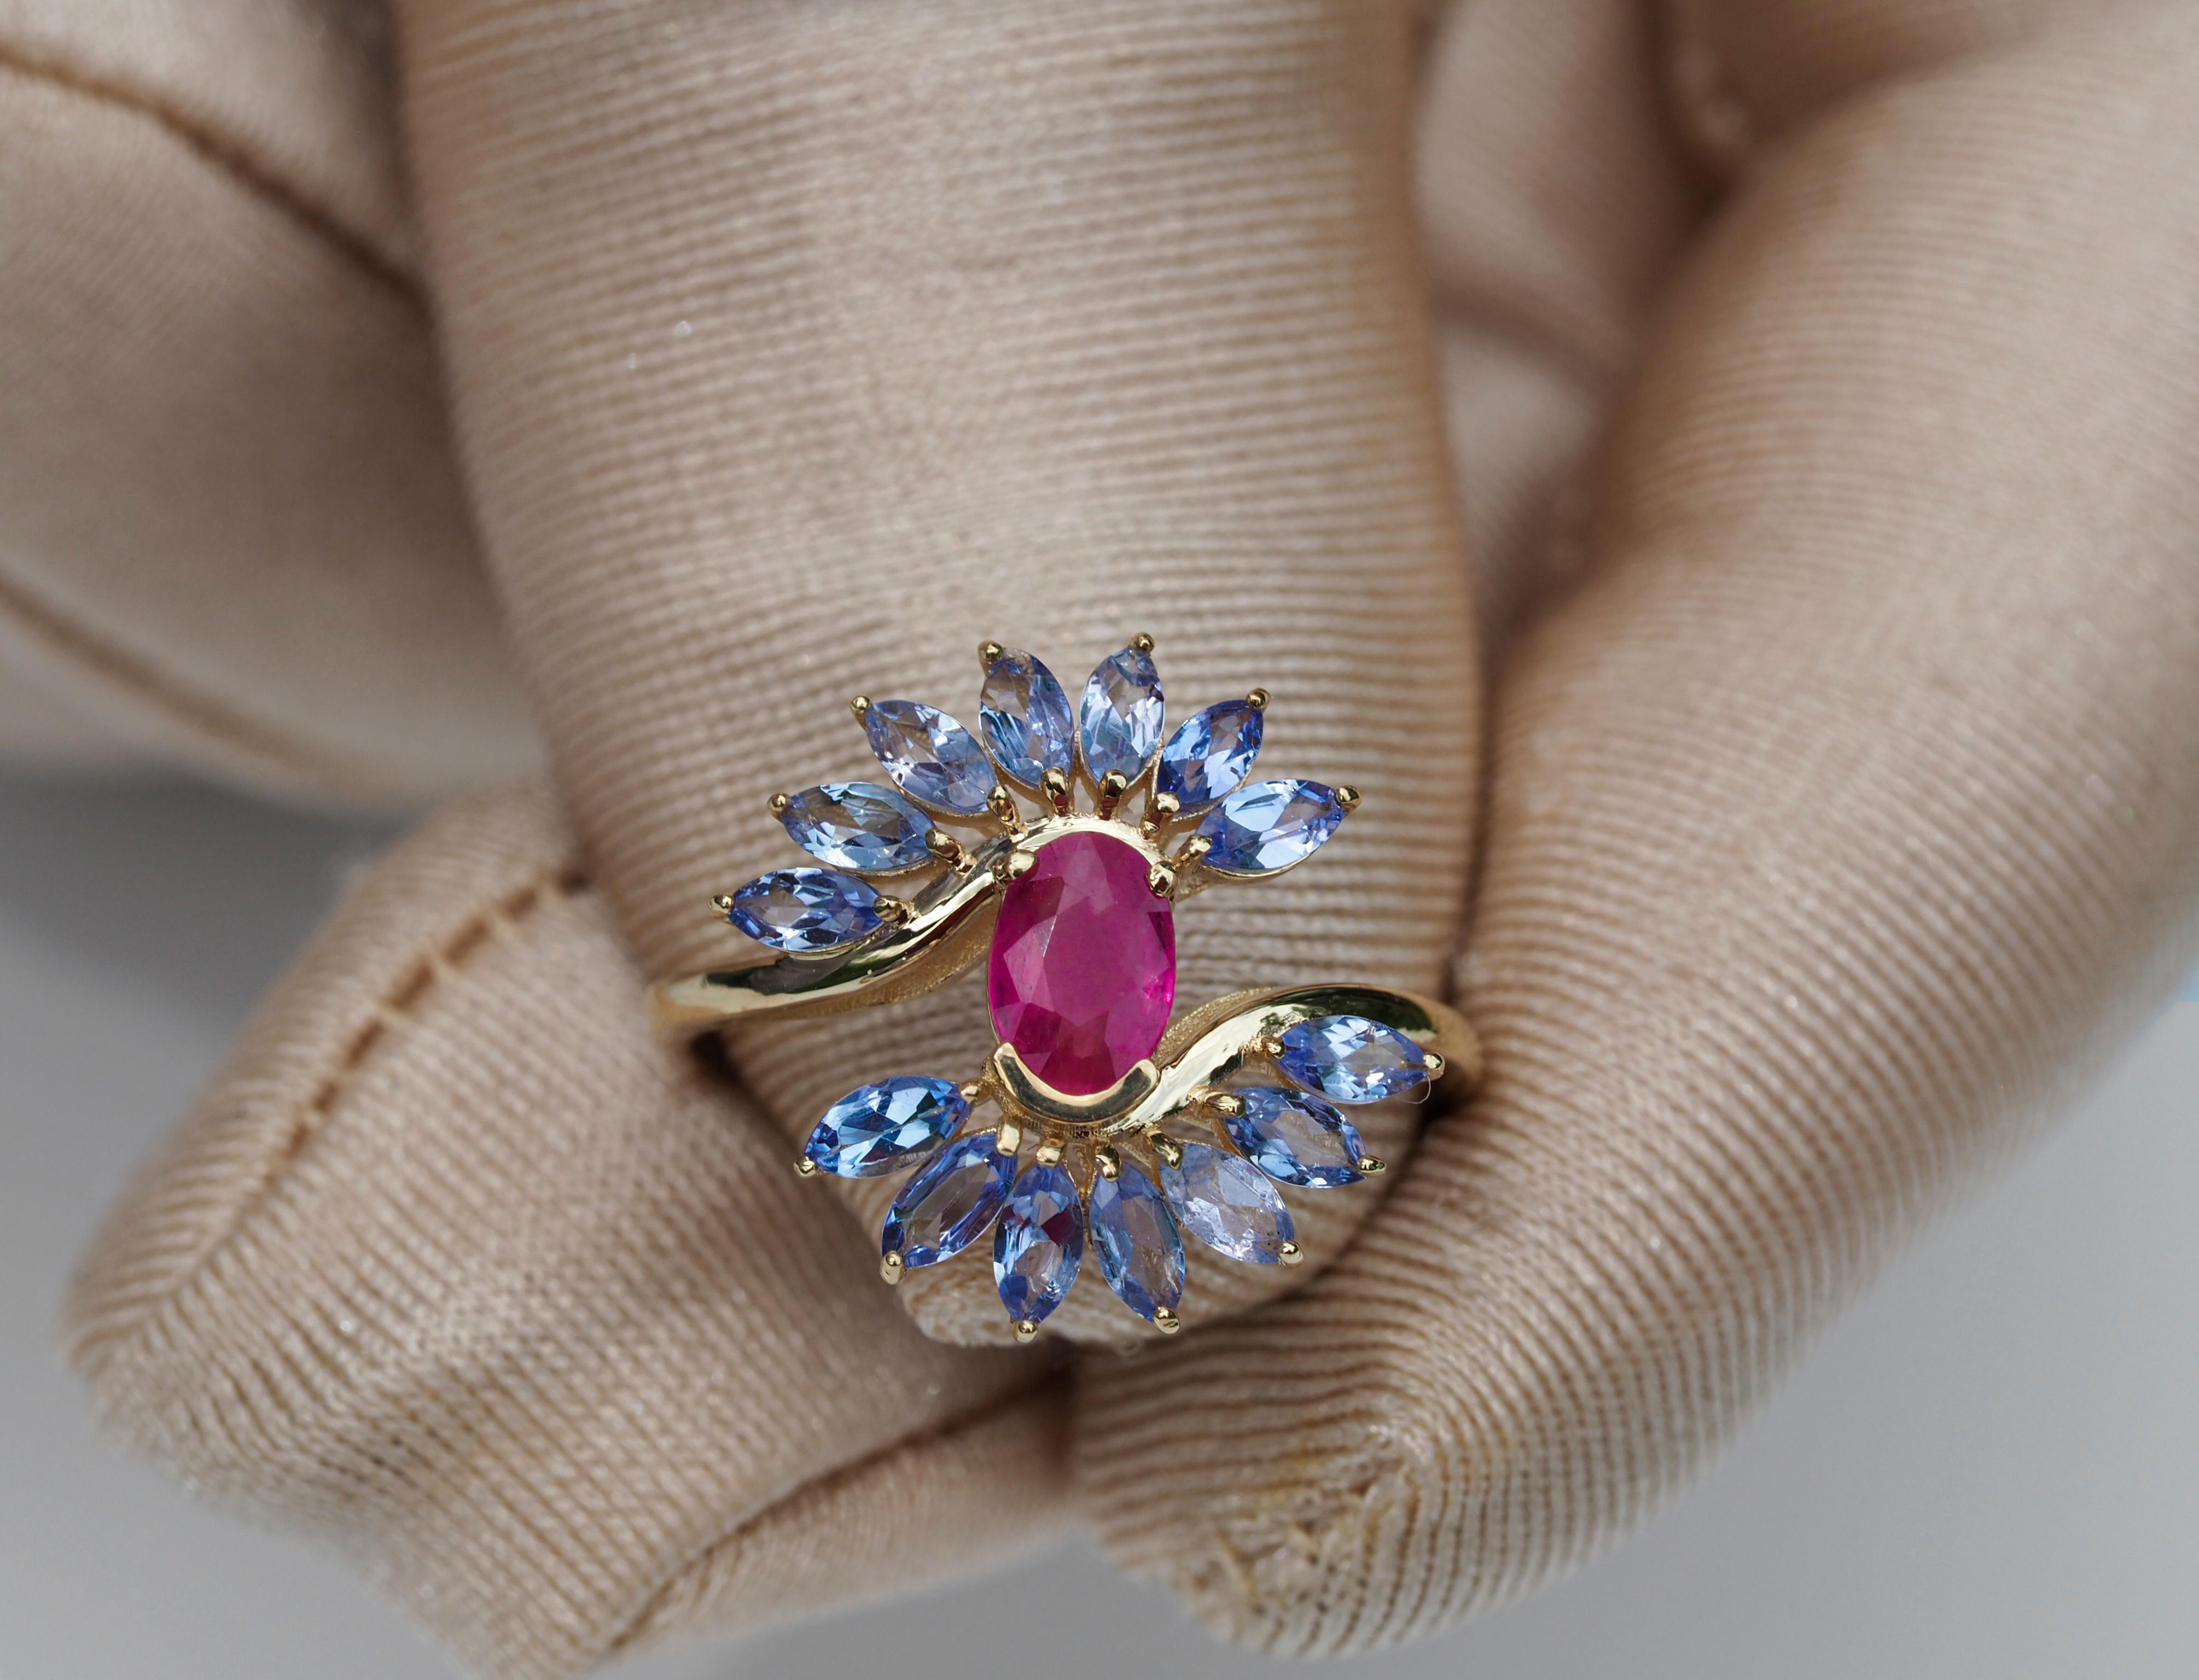 For Sale:  14 karat Gold Ring with Ruby and Tanzanites. Oval ruby ring. Tanzanite ring! 7